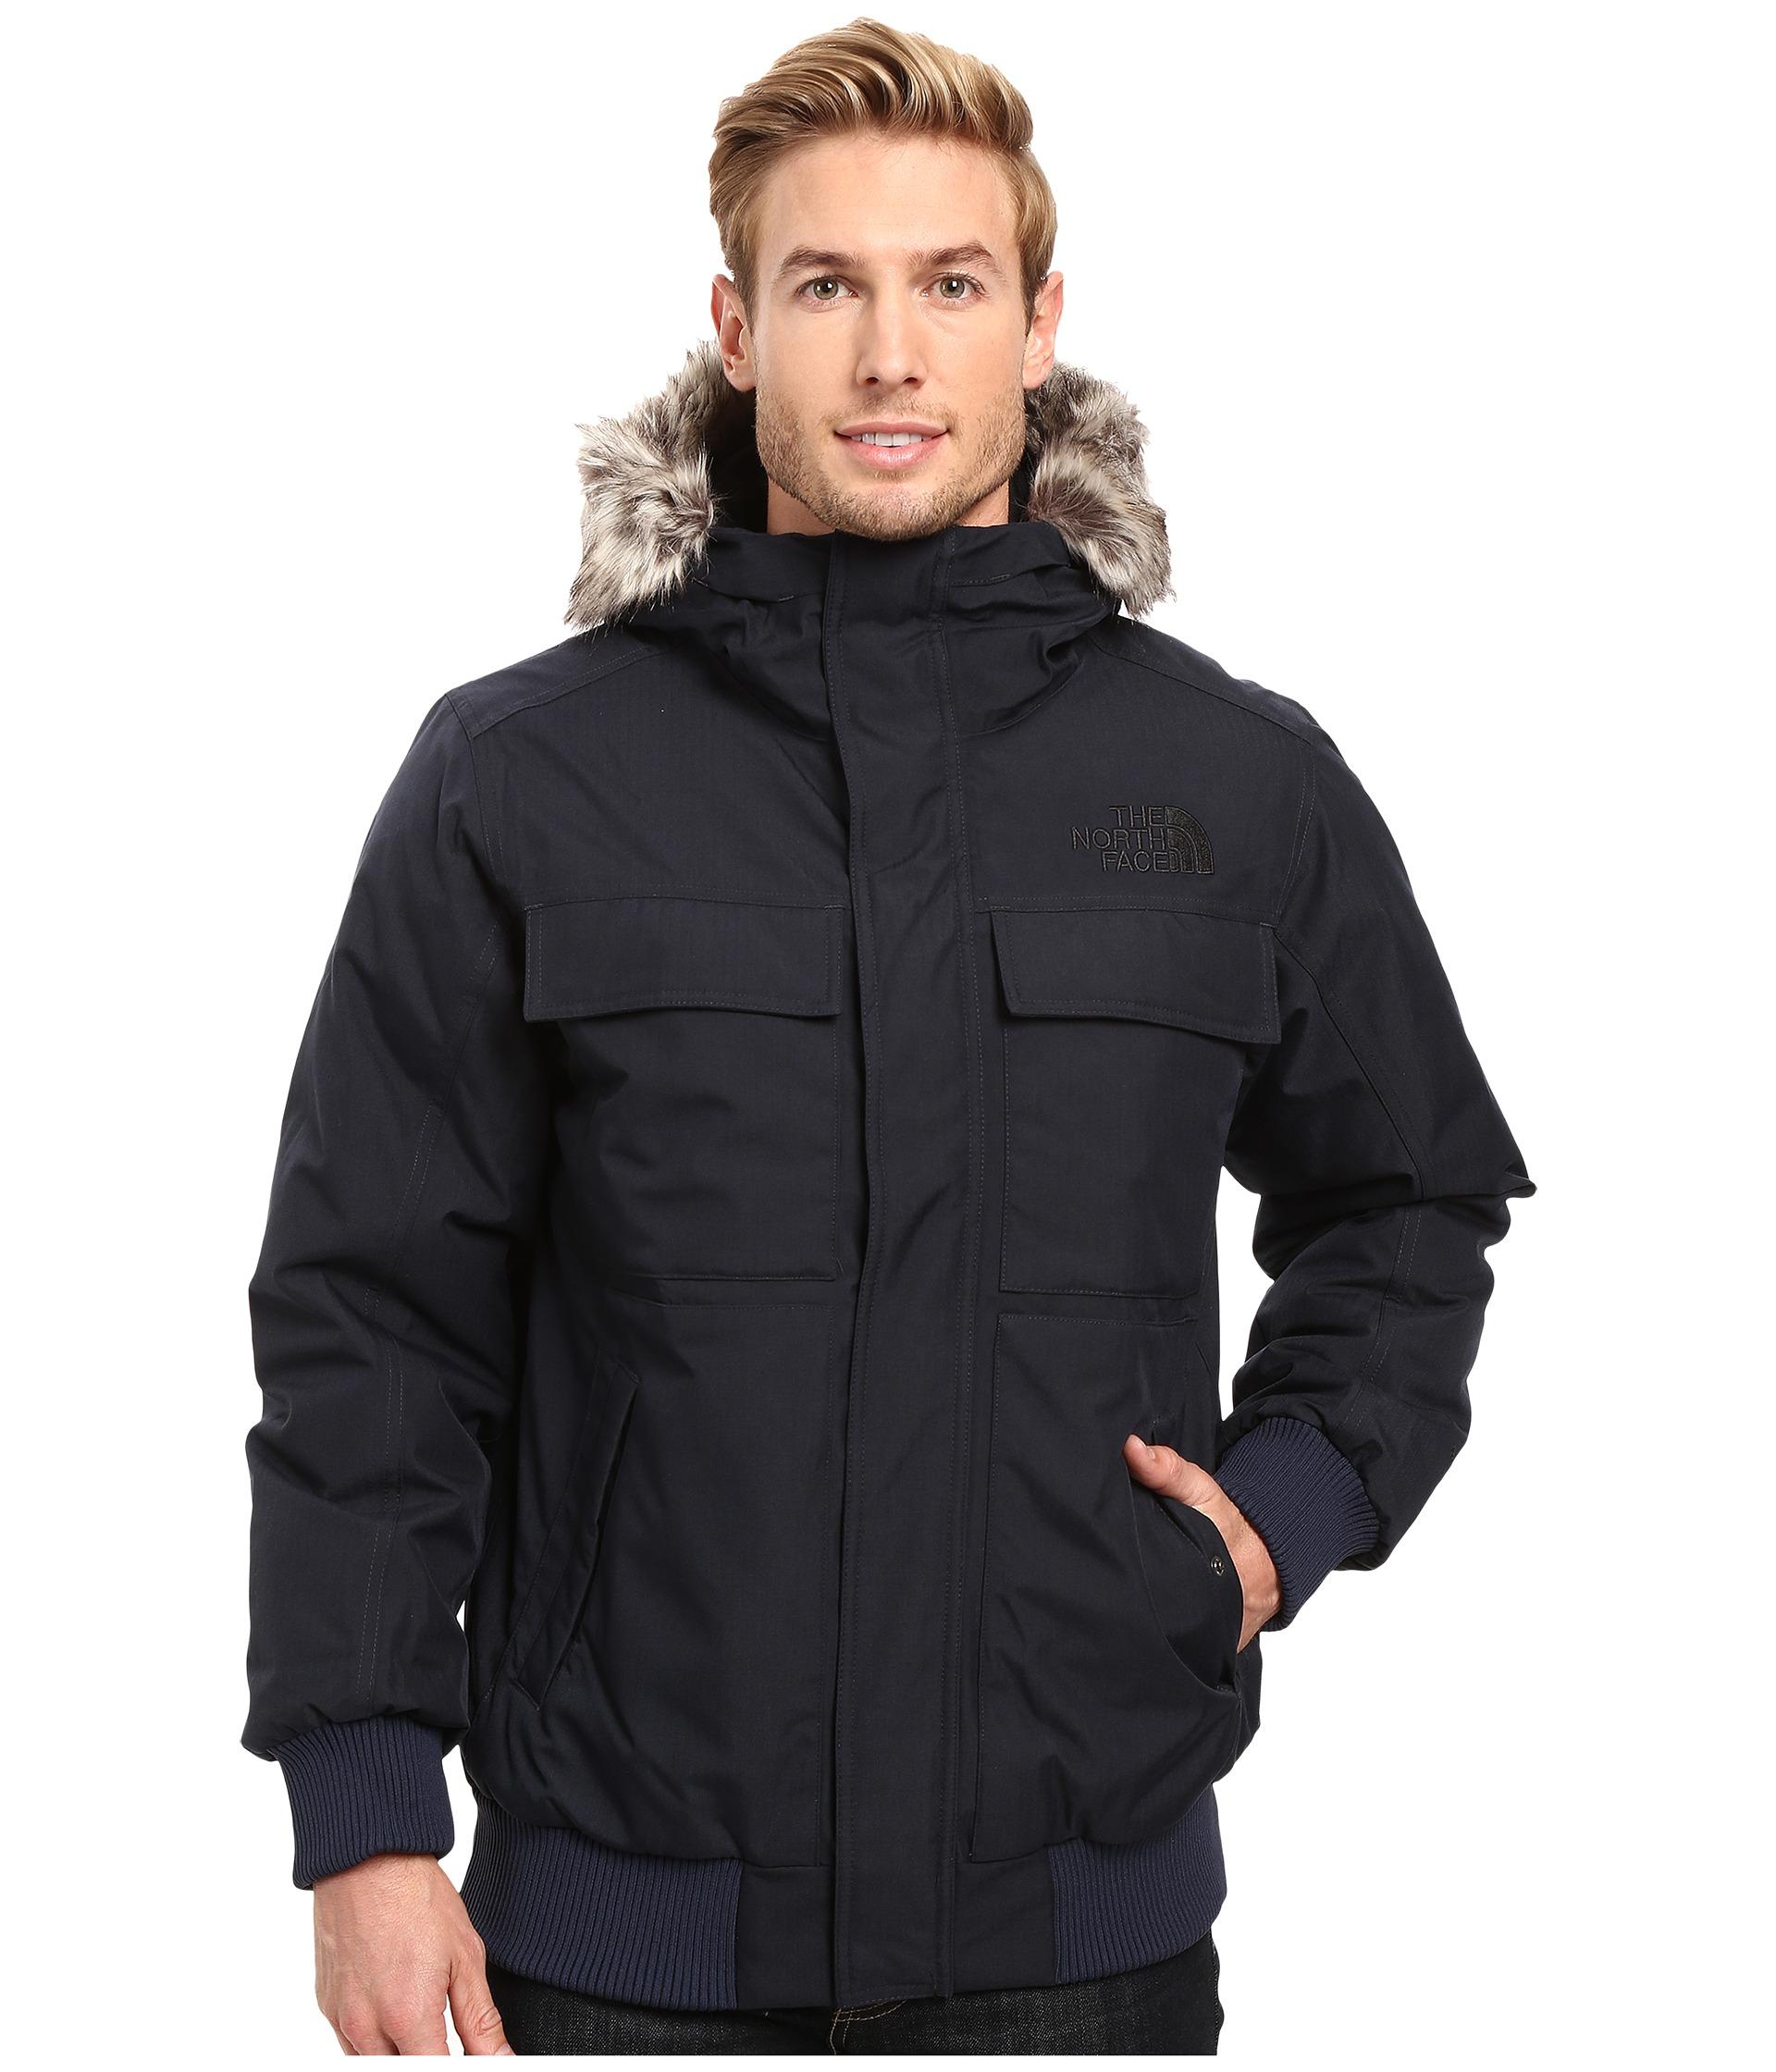 Lyst - The North Face Gotham Jacket Ii for Men